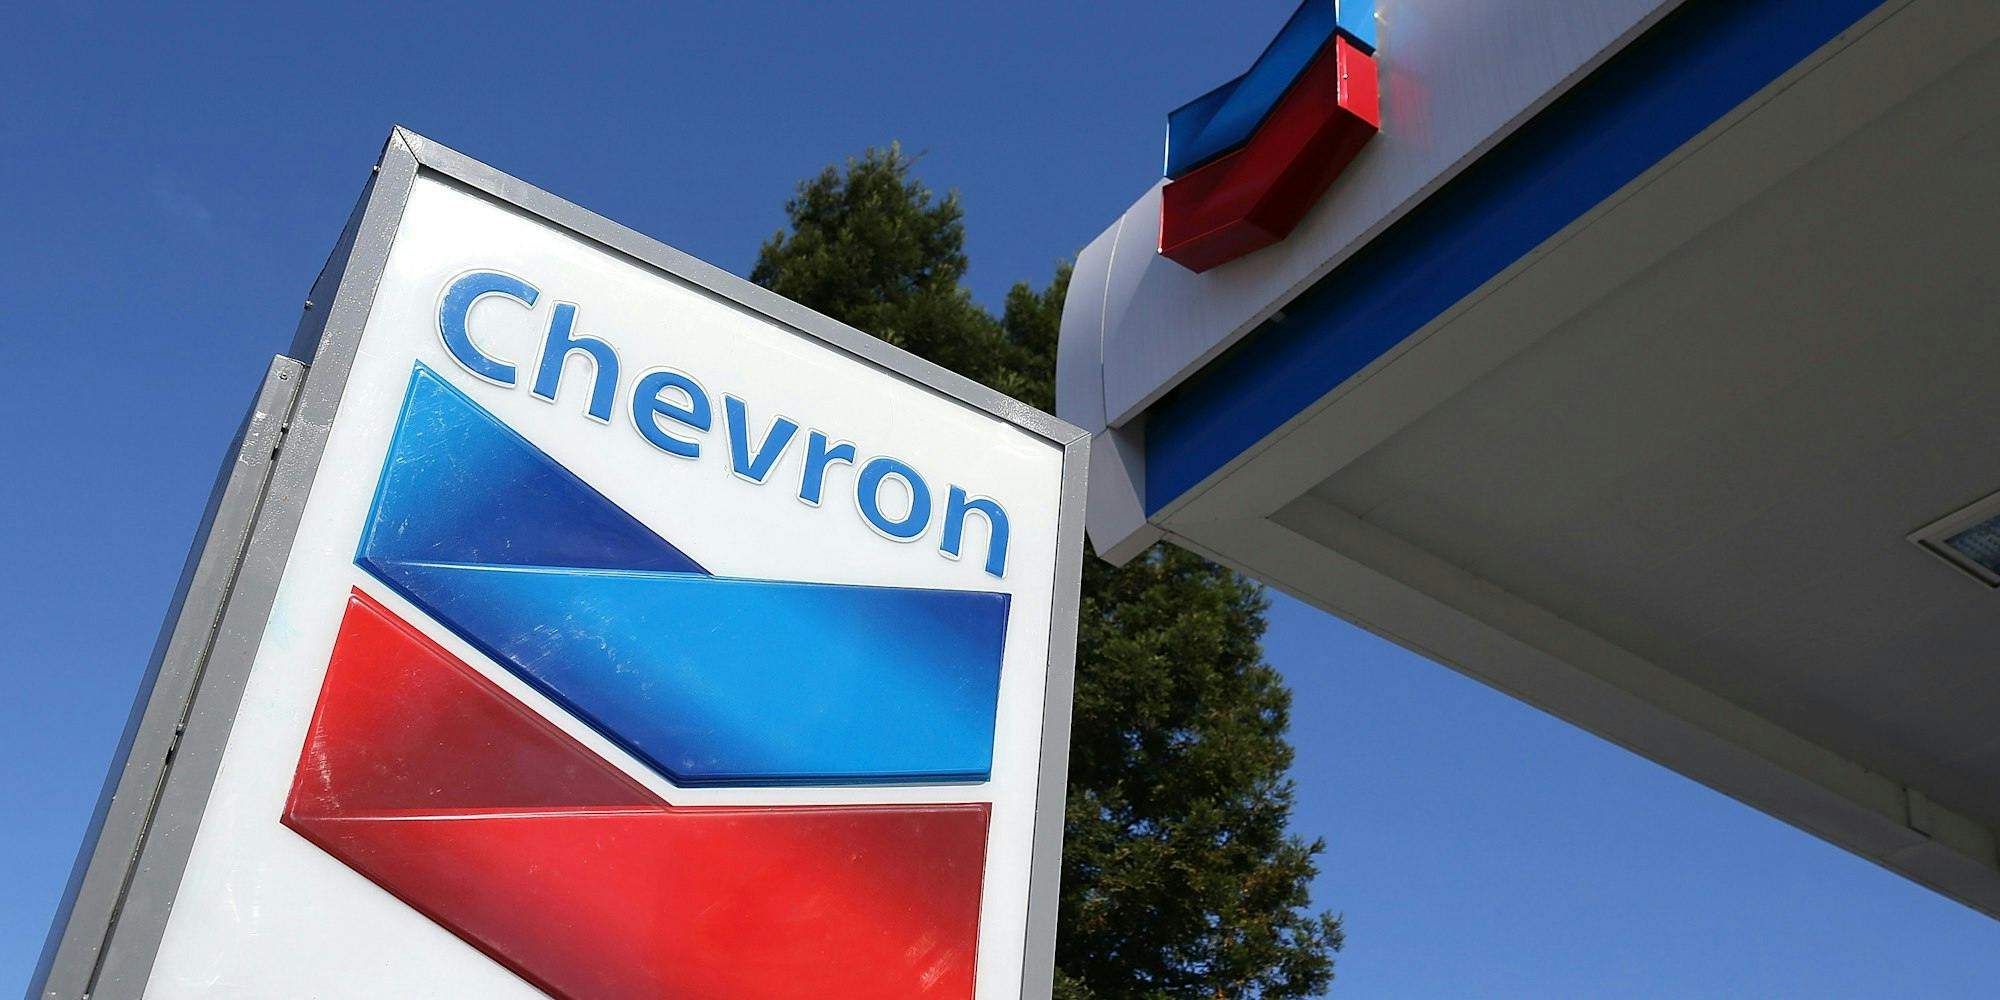 $2.7MM funded for the acquisition of a Bay Area Chevron